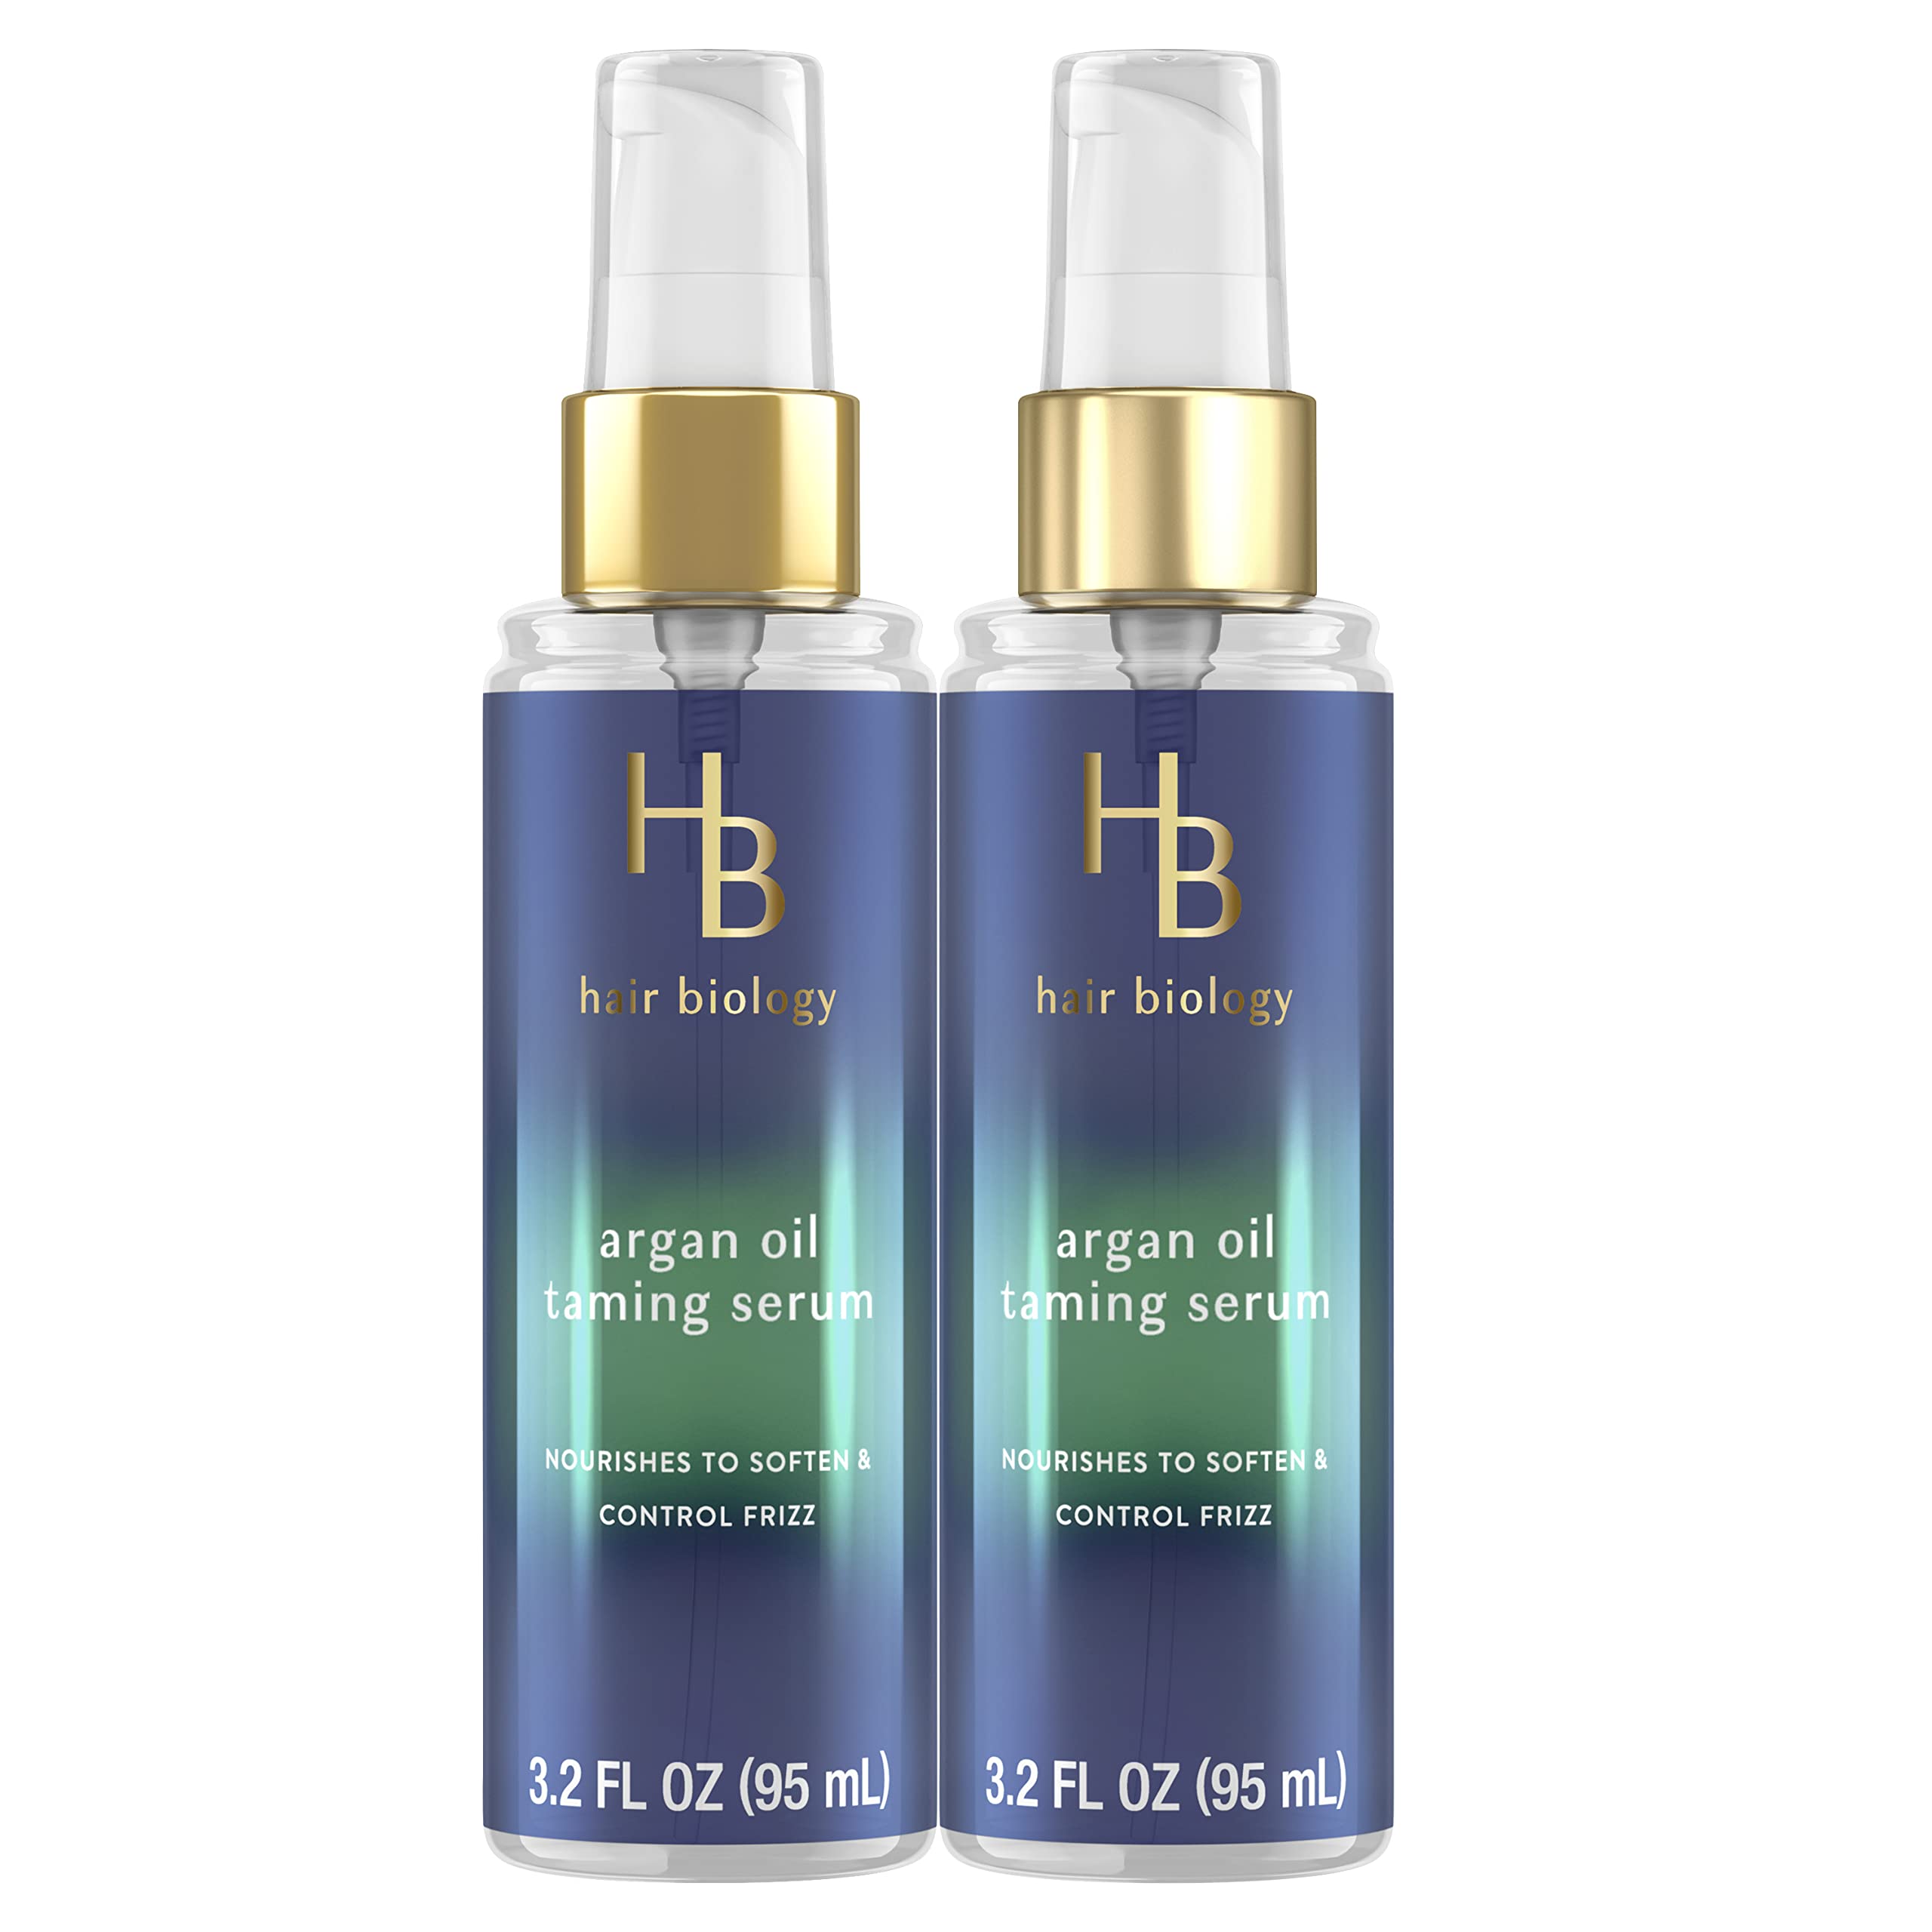 Hair Biology Argan Oil Taming Serum, Twin Pack, 3.2 Fl Oz Each — Hair Serum Nourishes to Soften & Control Frizz. Infused with Biotin — Dry Hair Treatment, Safe for Color Treated Hair